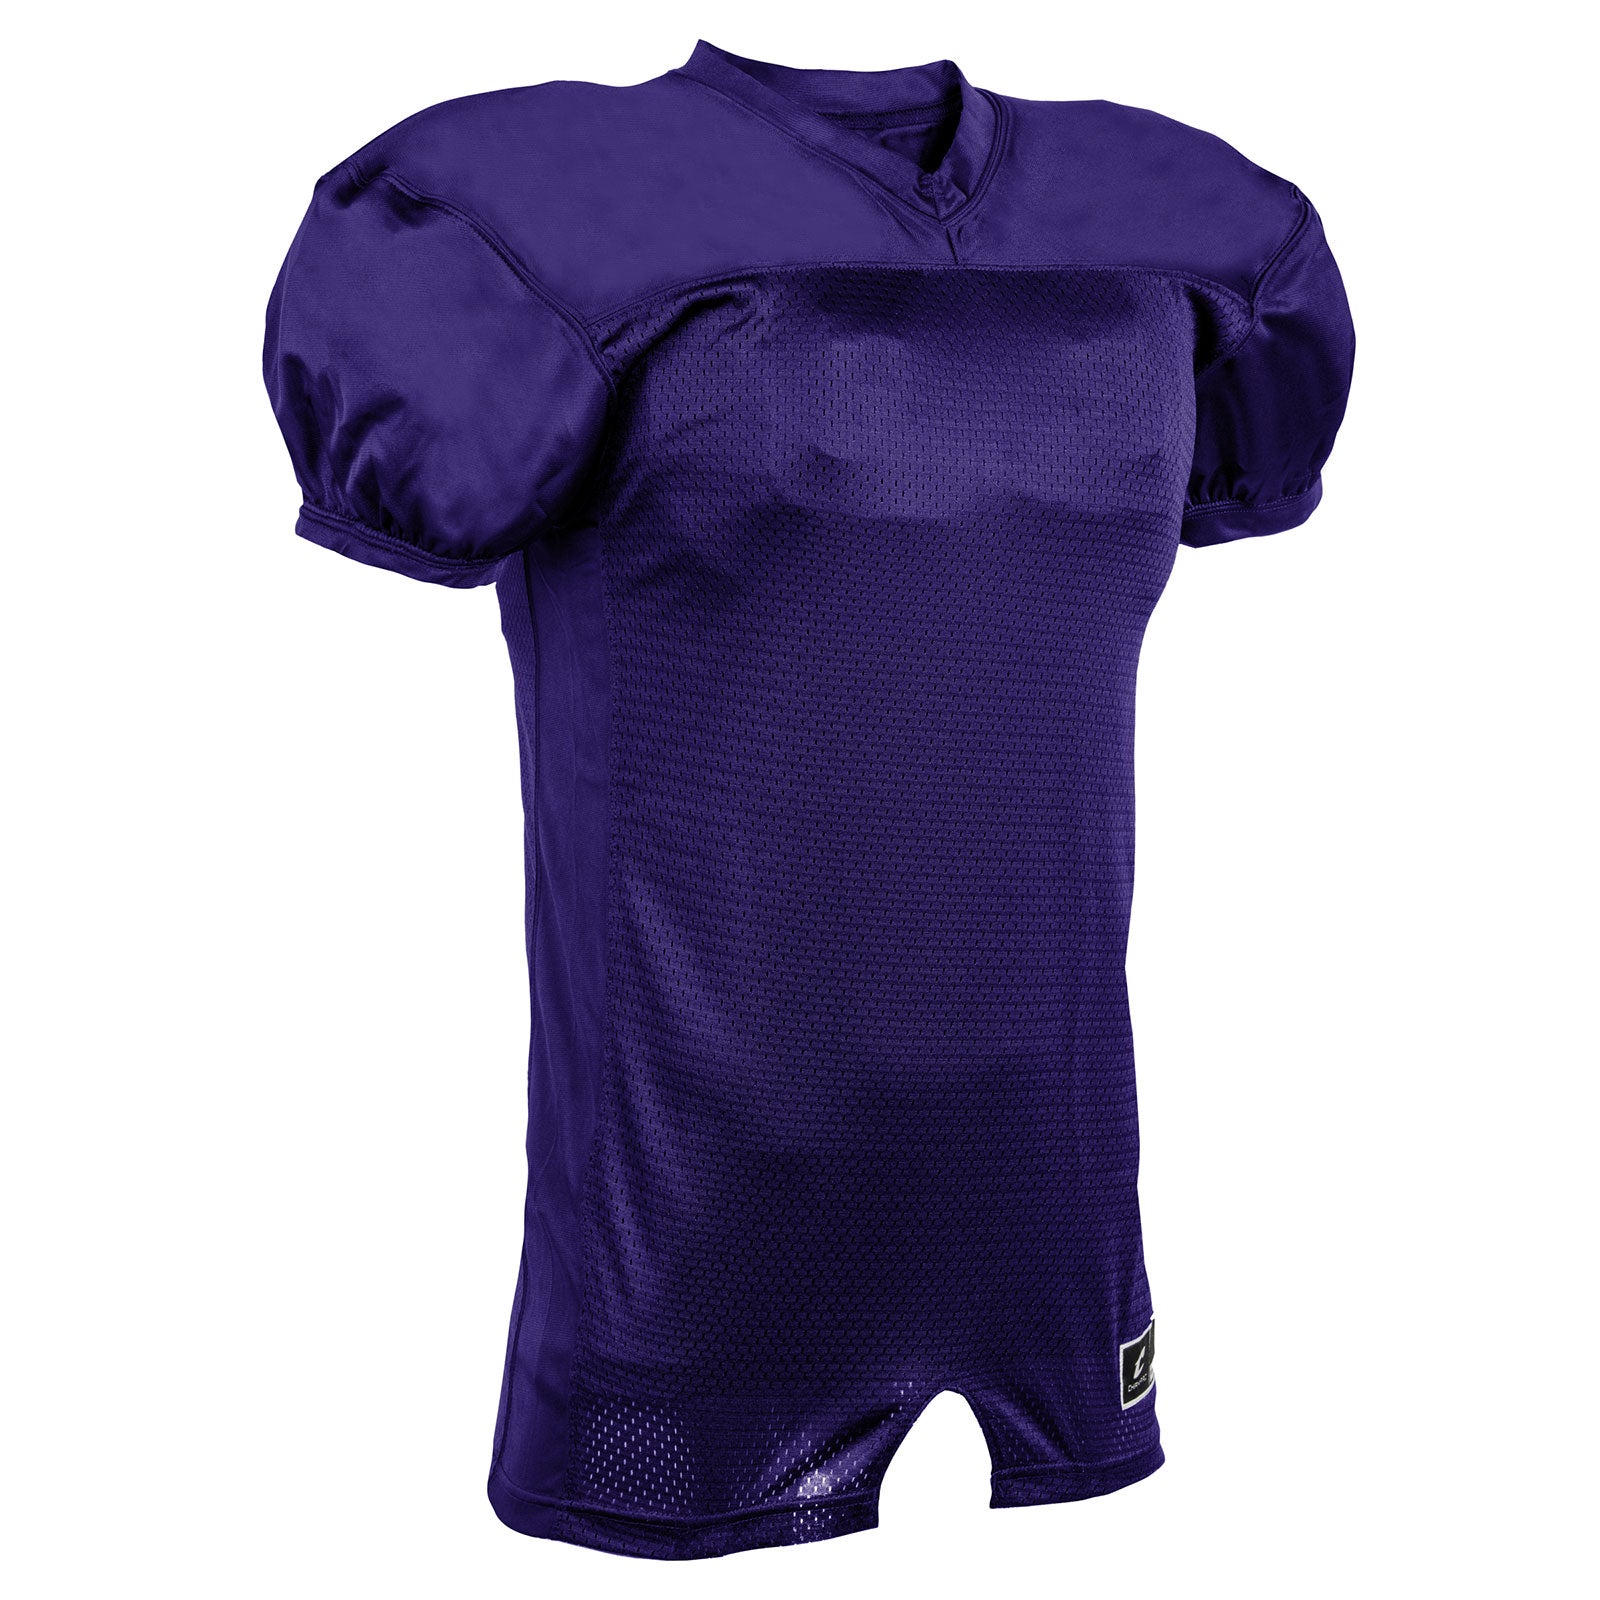 Pro Game Stretch Mesh Solid Football Jersey PURPLE BODY